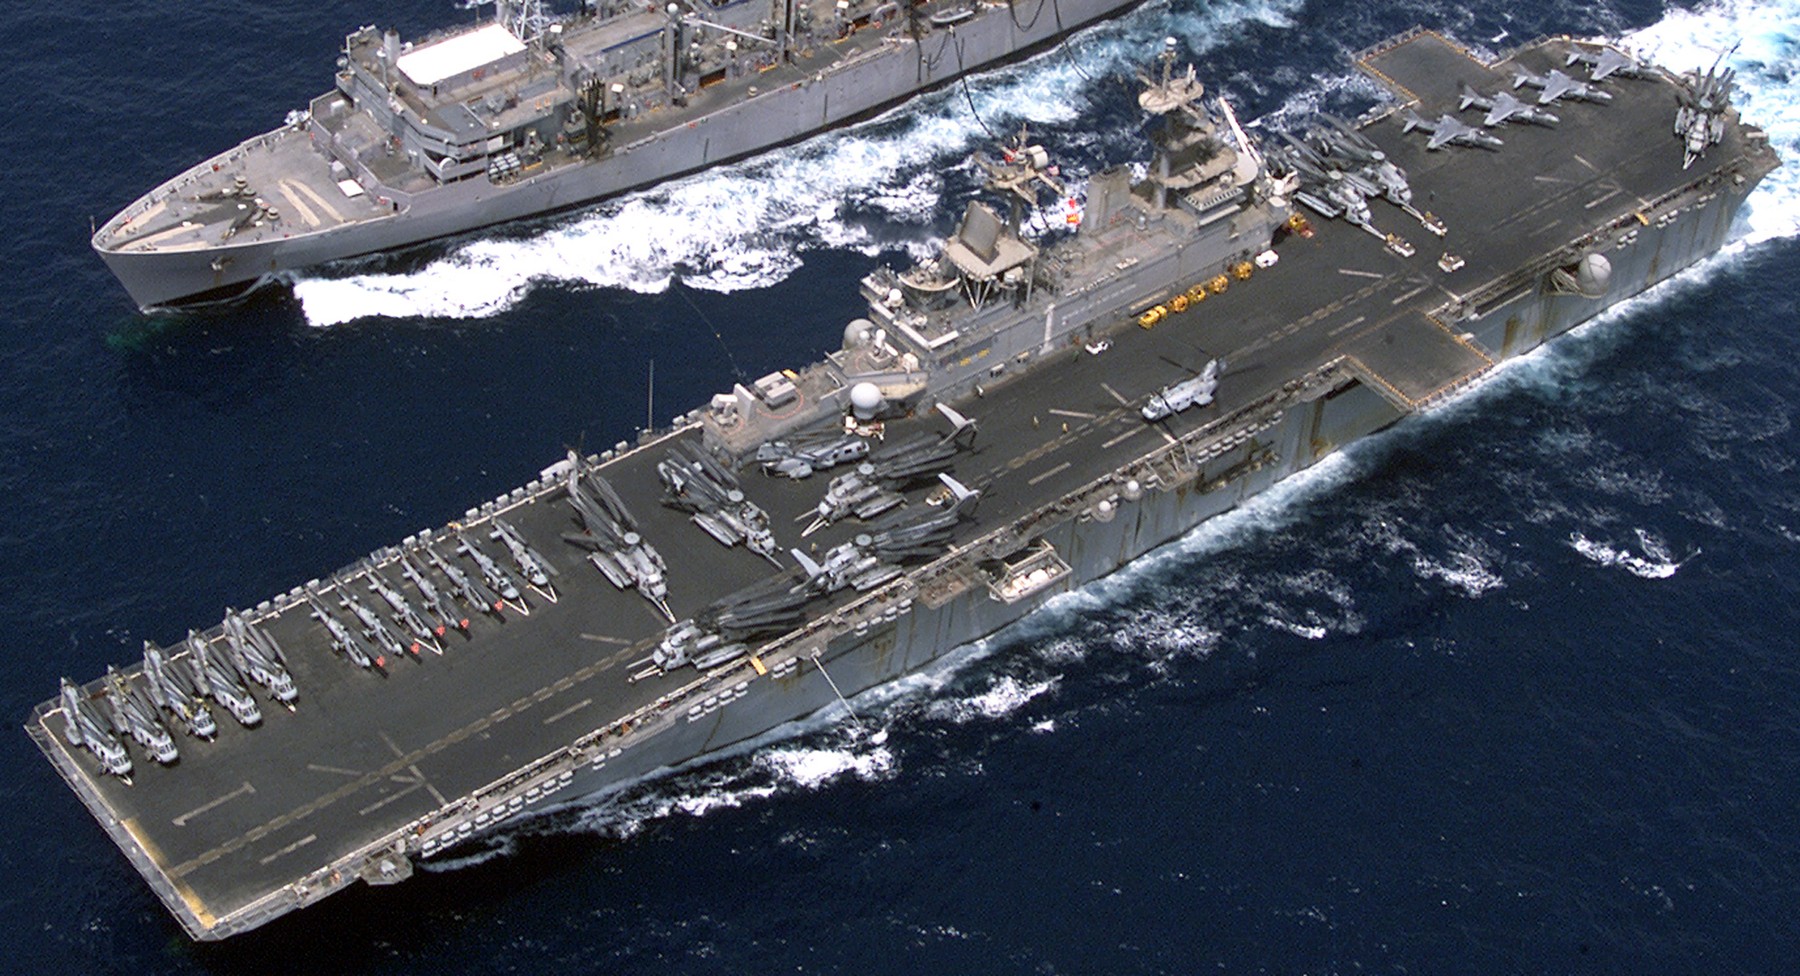 lhd-1 uss wasp amphibious assault landing ship dock helicopter us navy operation enduring freedom 12